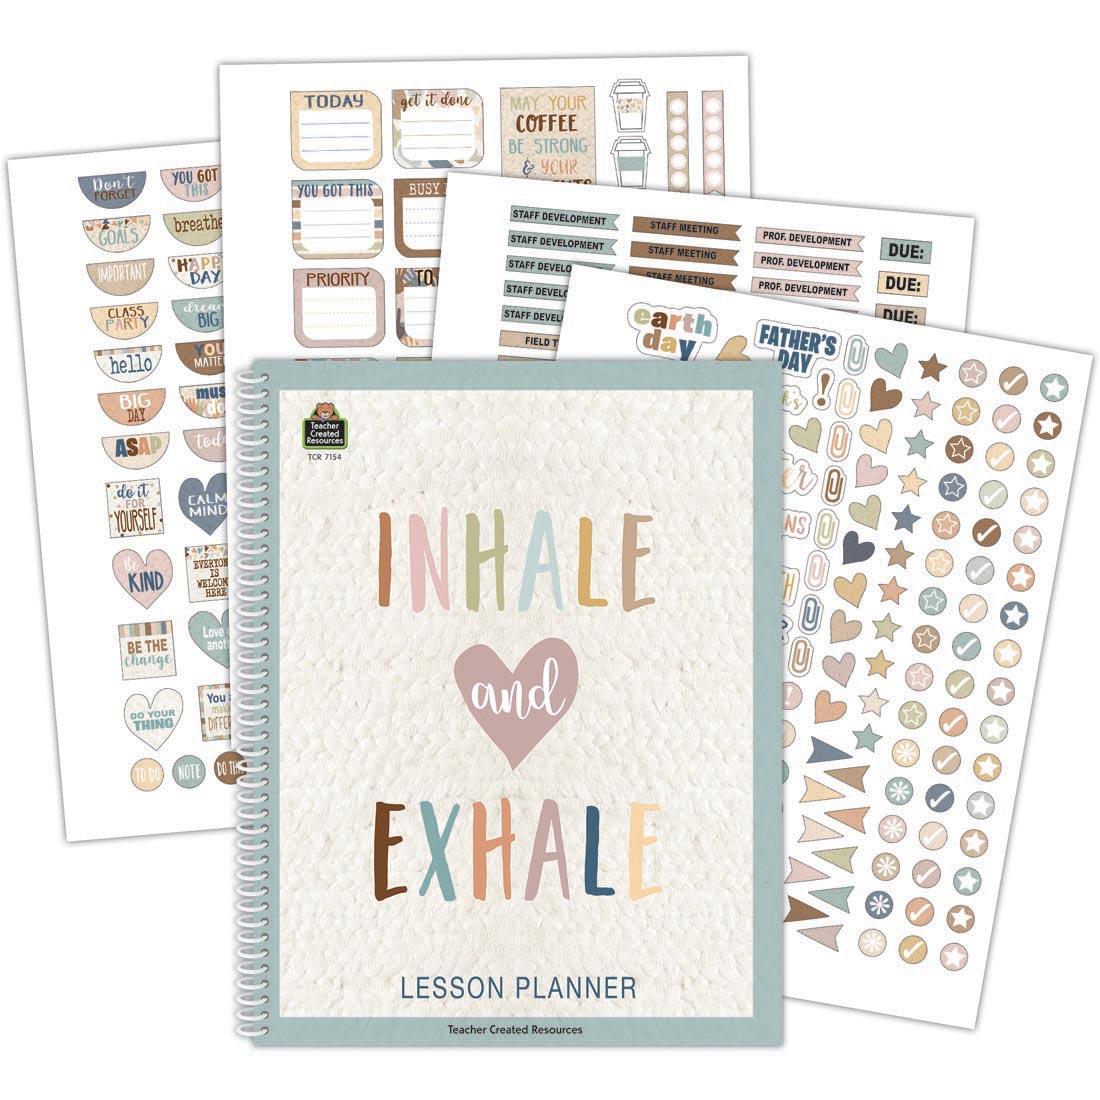 Lesson Planner from the Everyone is Welcome collection by Teacher Created Resources